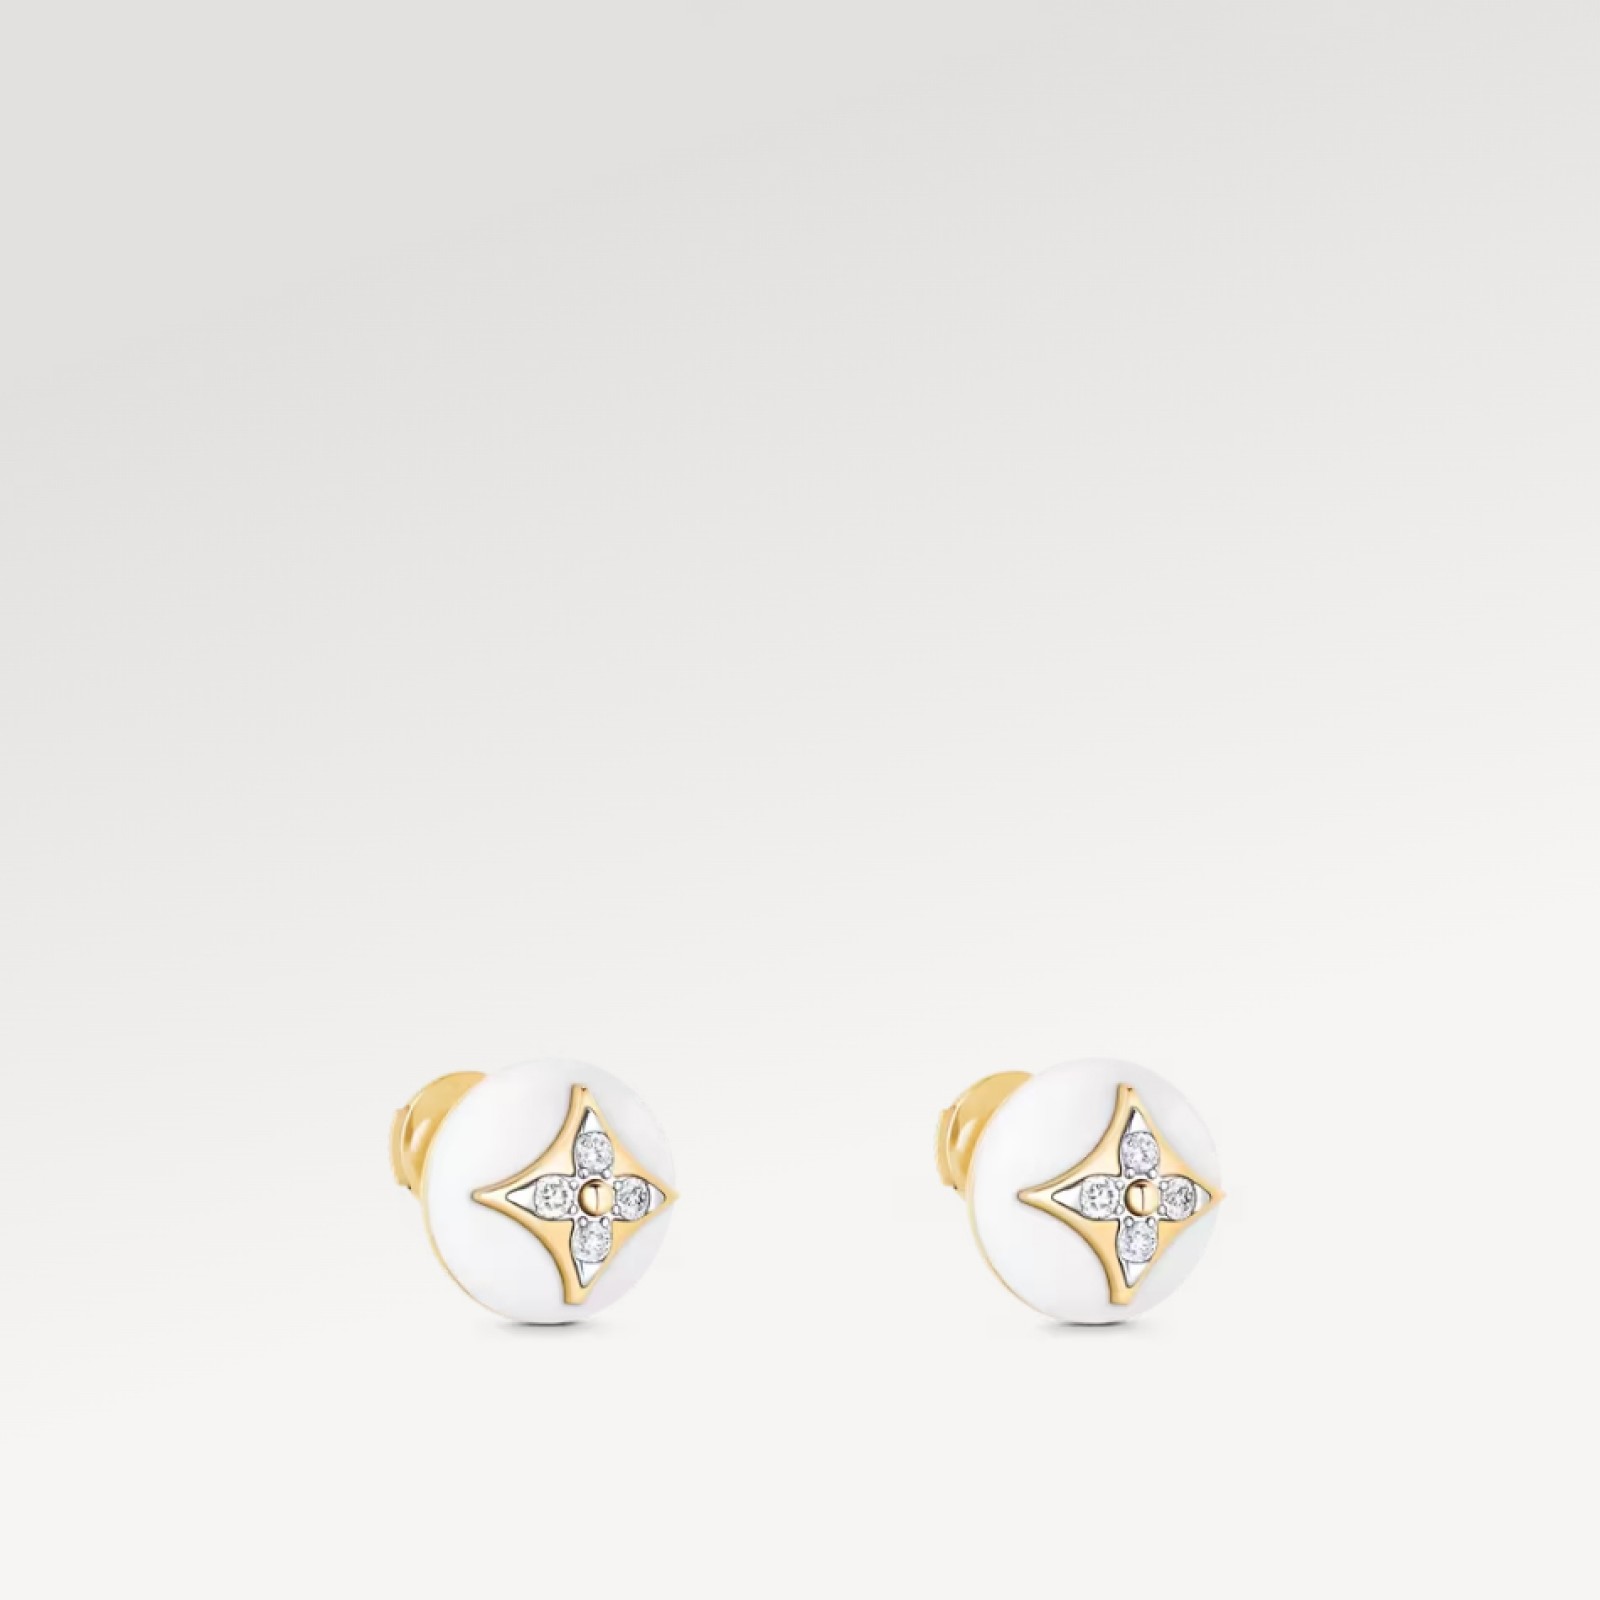 Color Blossom Studs, Yellow Gold, White Gold, White Agate And Diamonds